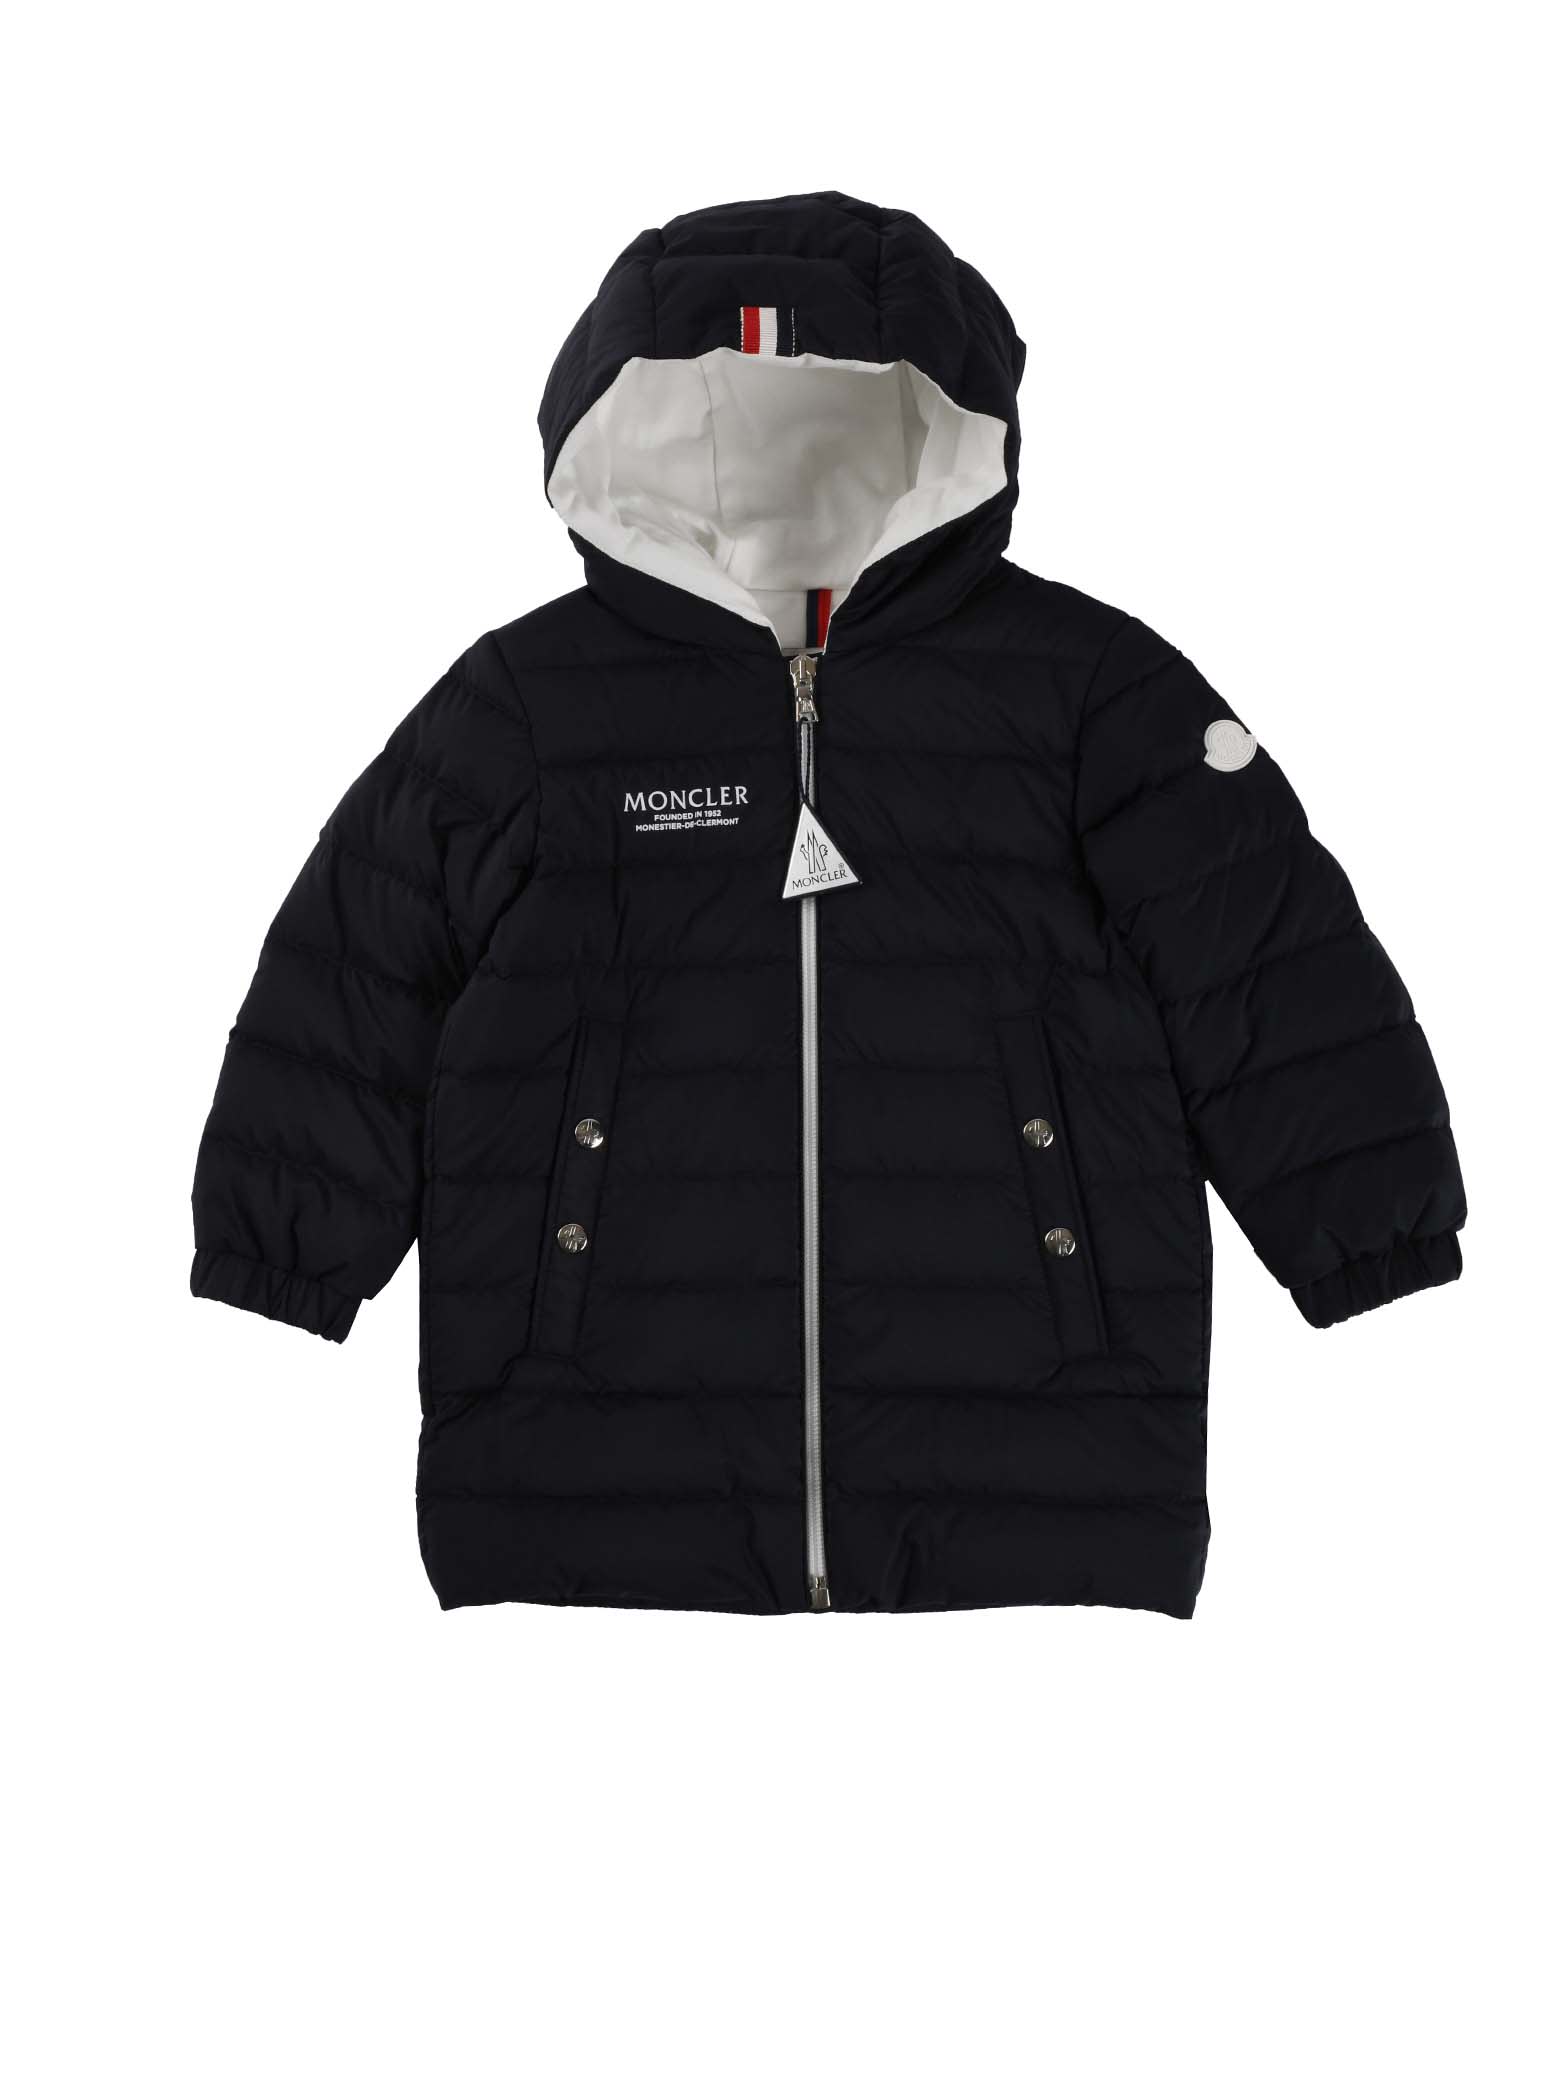 Moncler Long Jacket With Hood